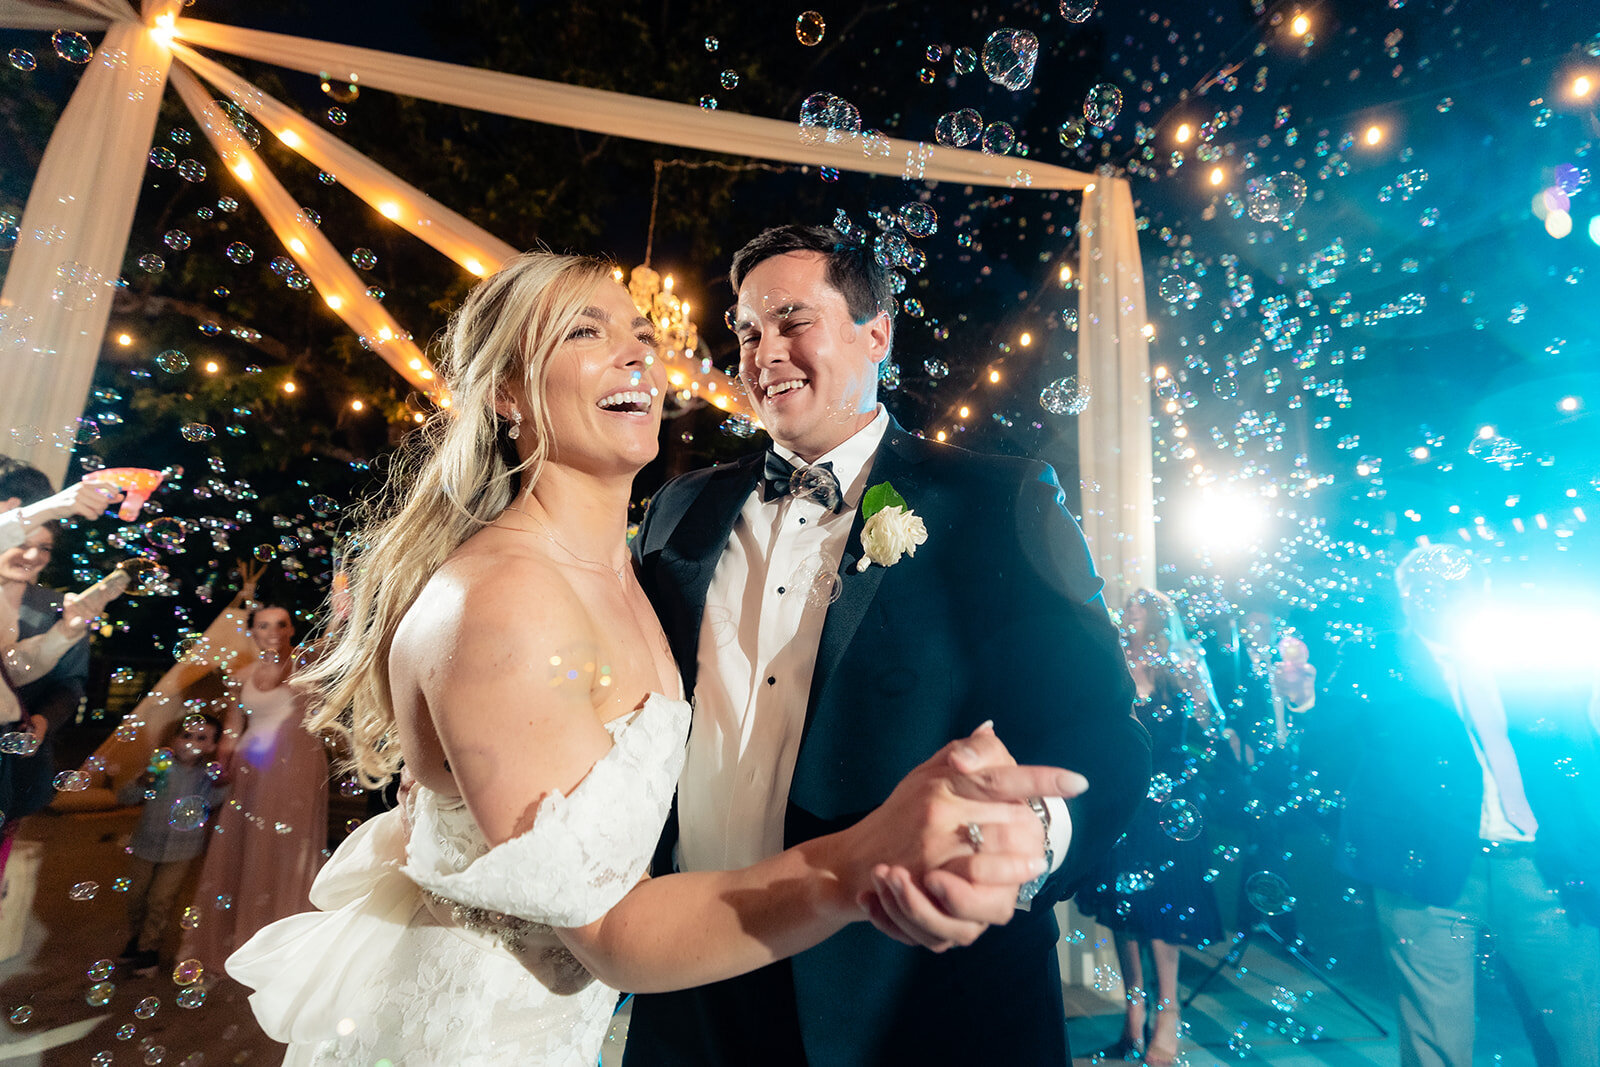 A bride and groom dancing with many bubbles floating around them on the dance floor